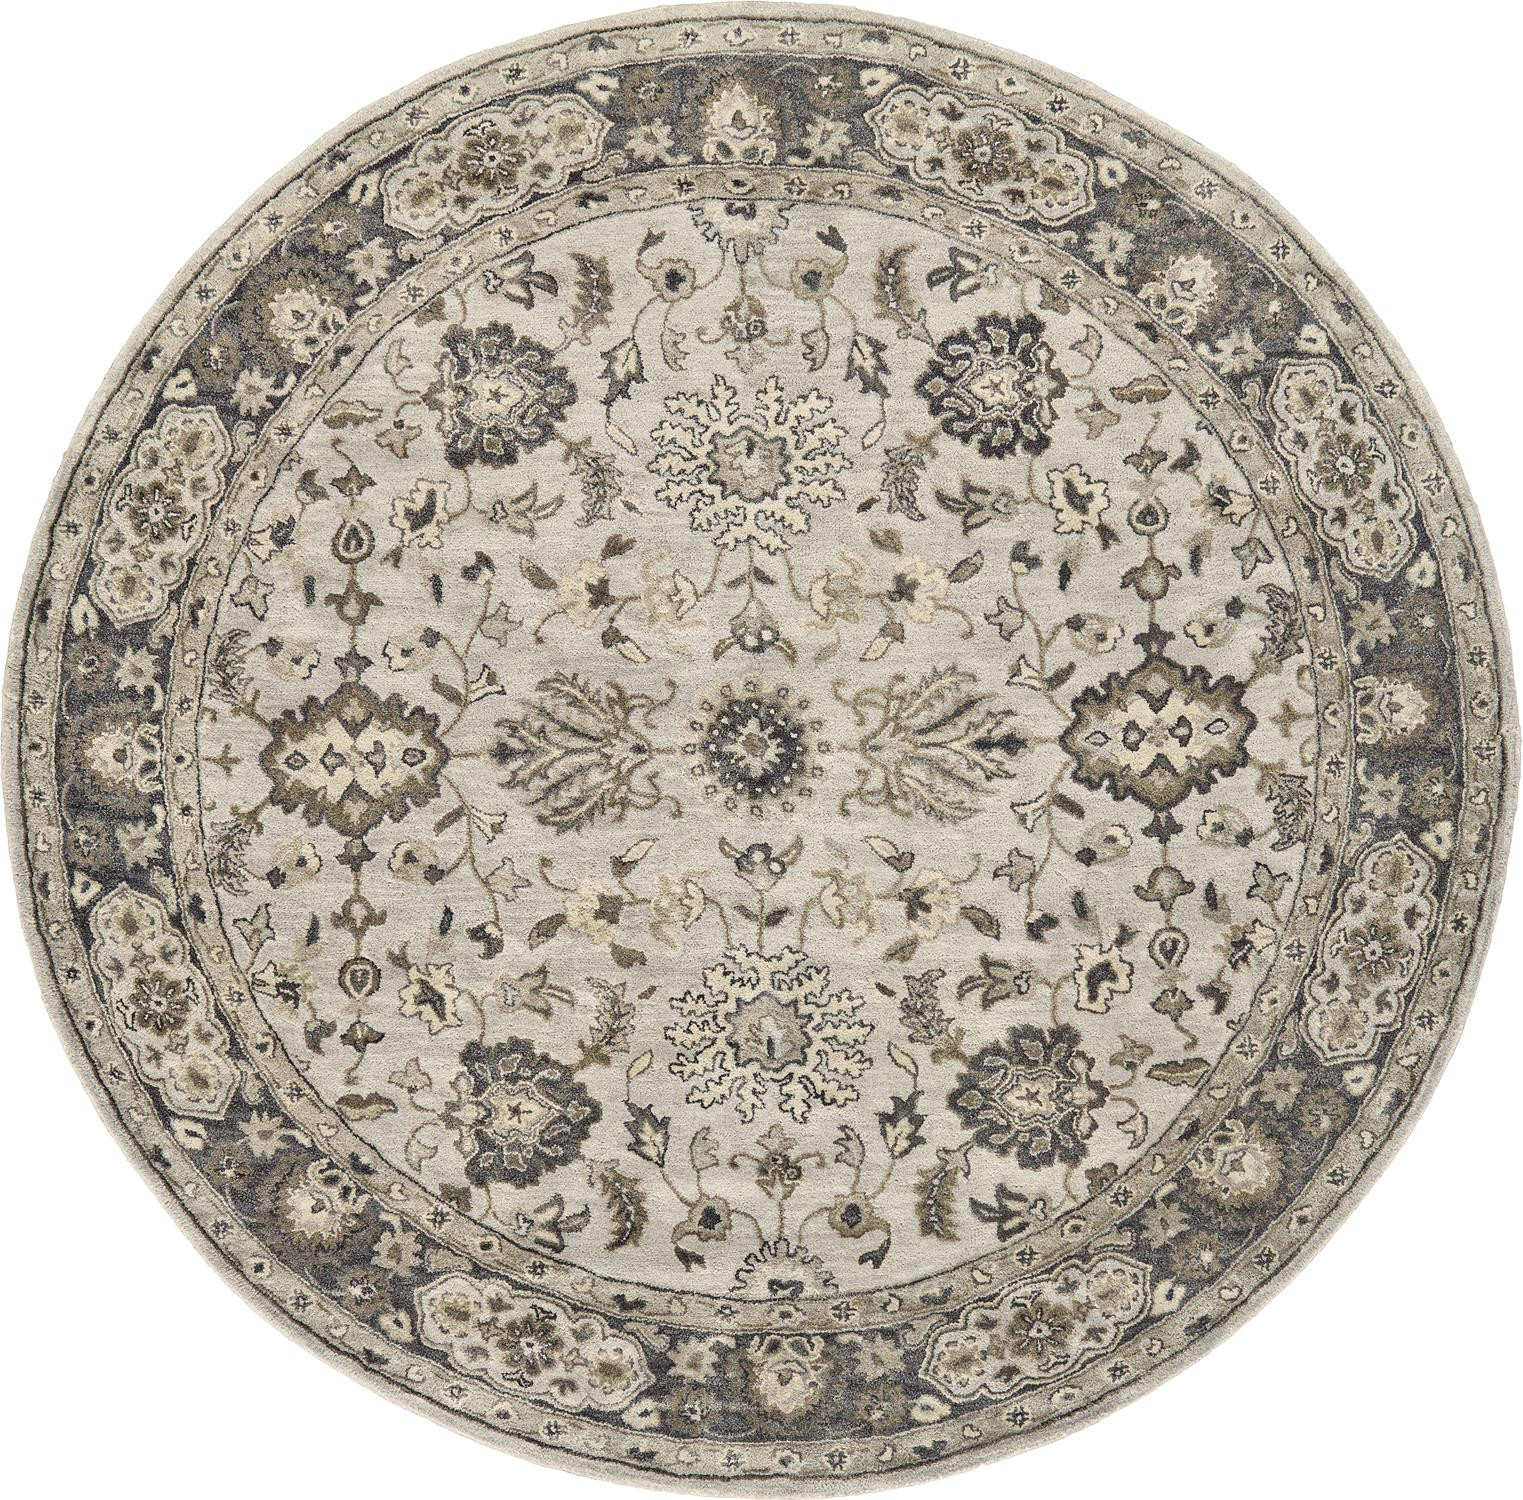 8' Gray Ivory And Taupe Round Wool Floral Tufted Handmade Stain Resistant Area Rug-511277-1